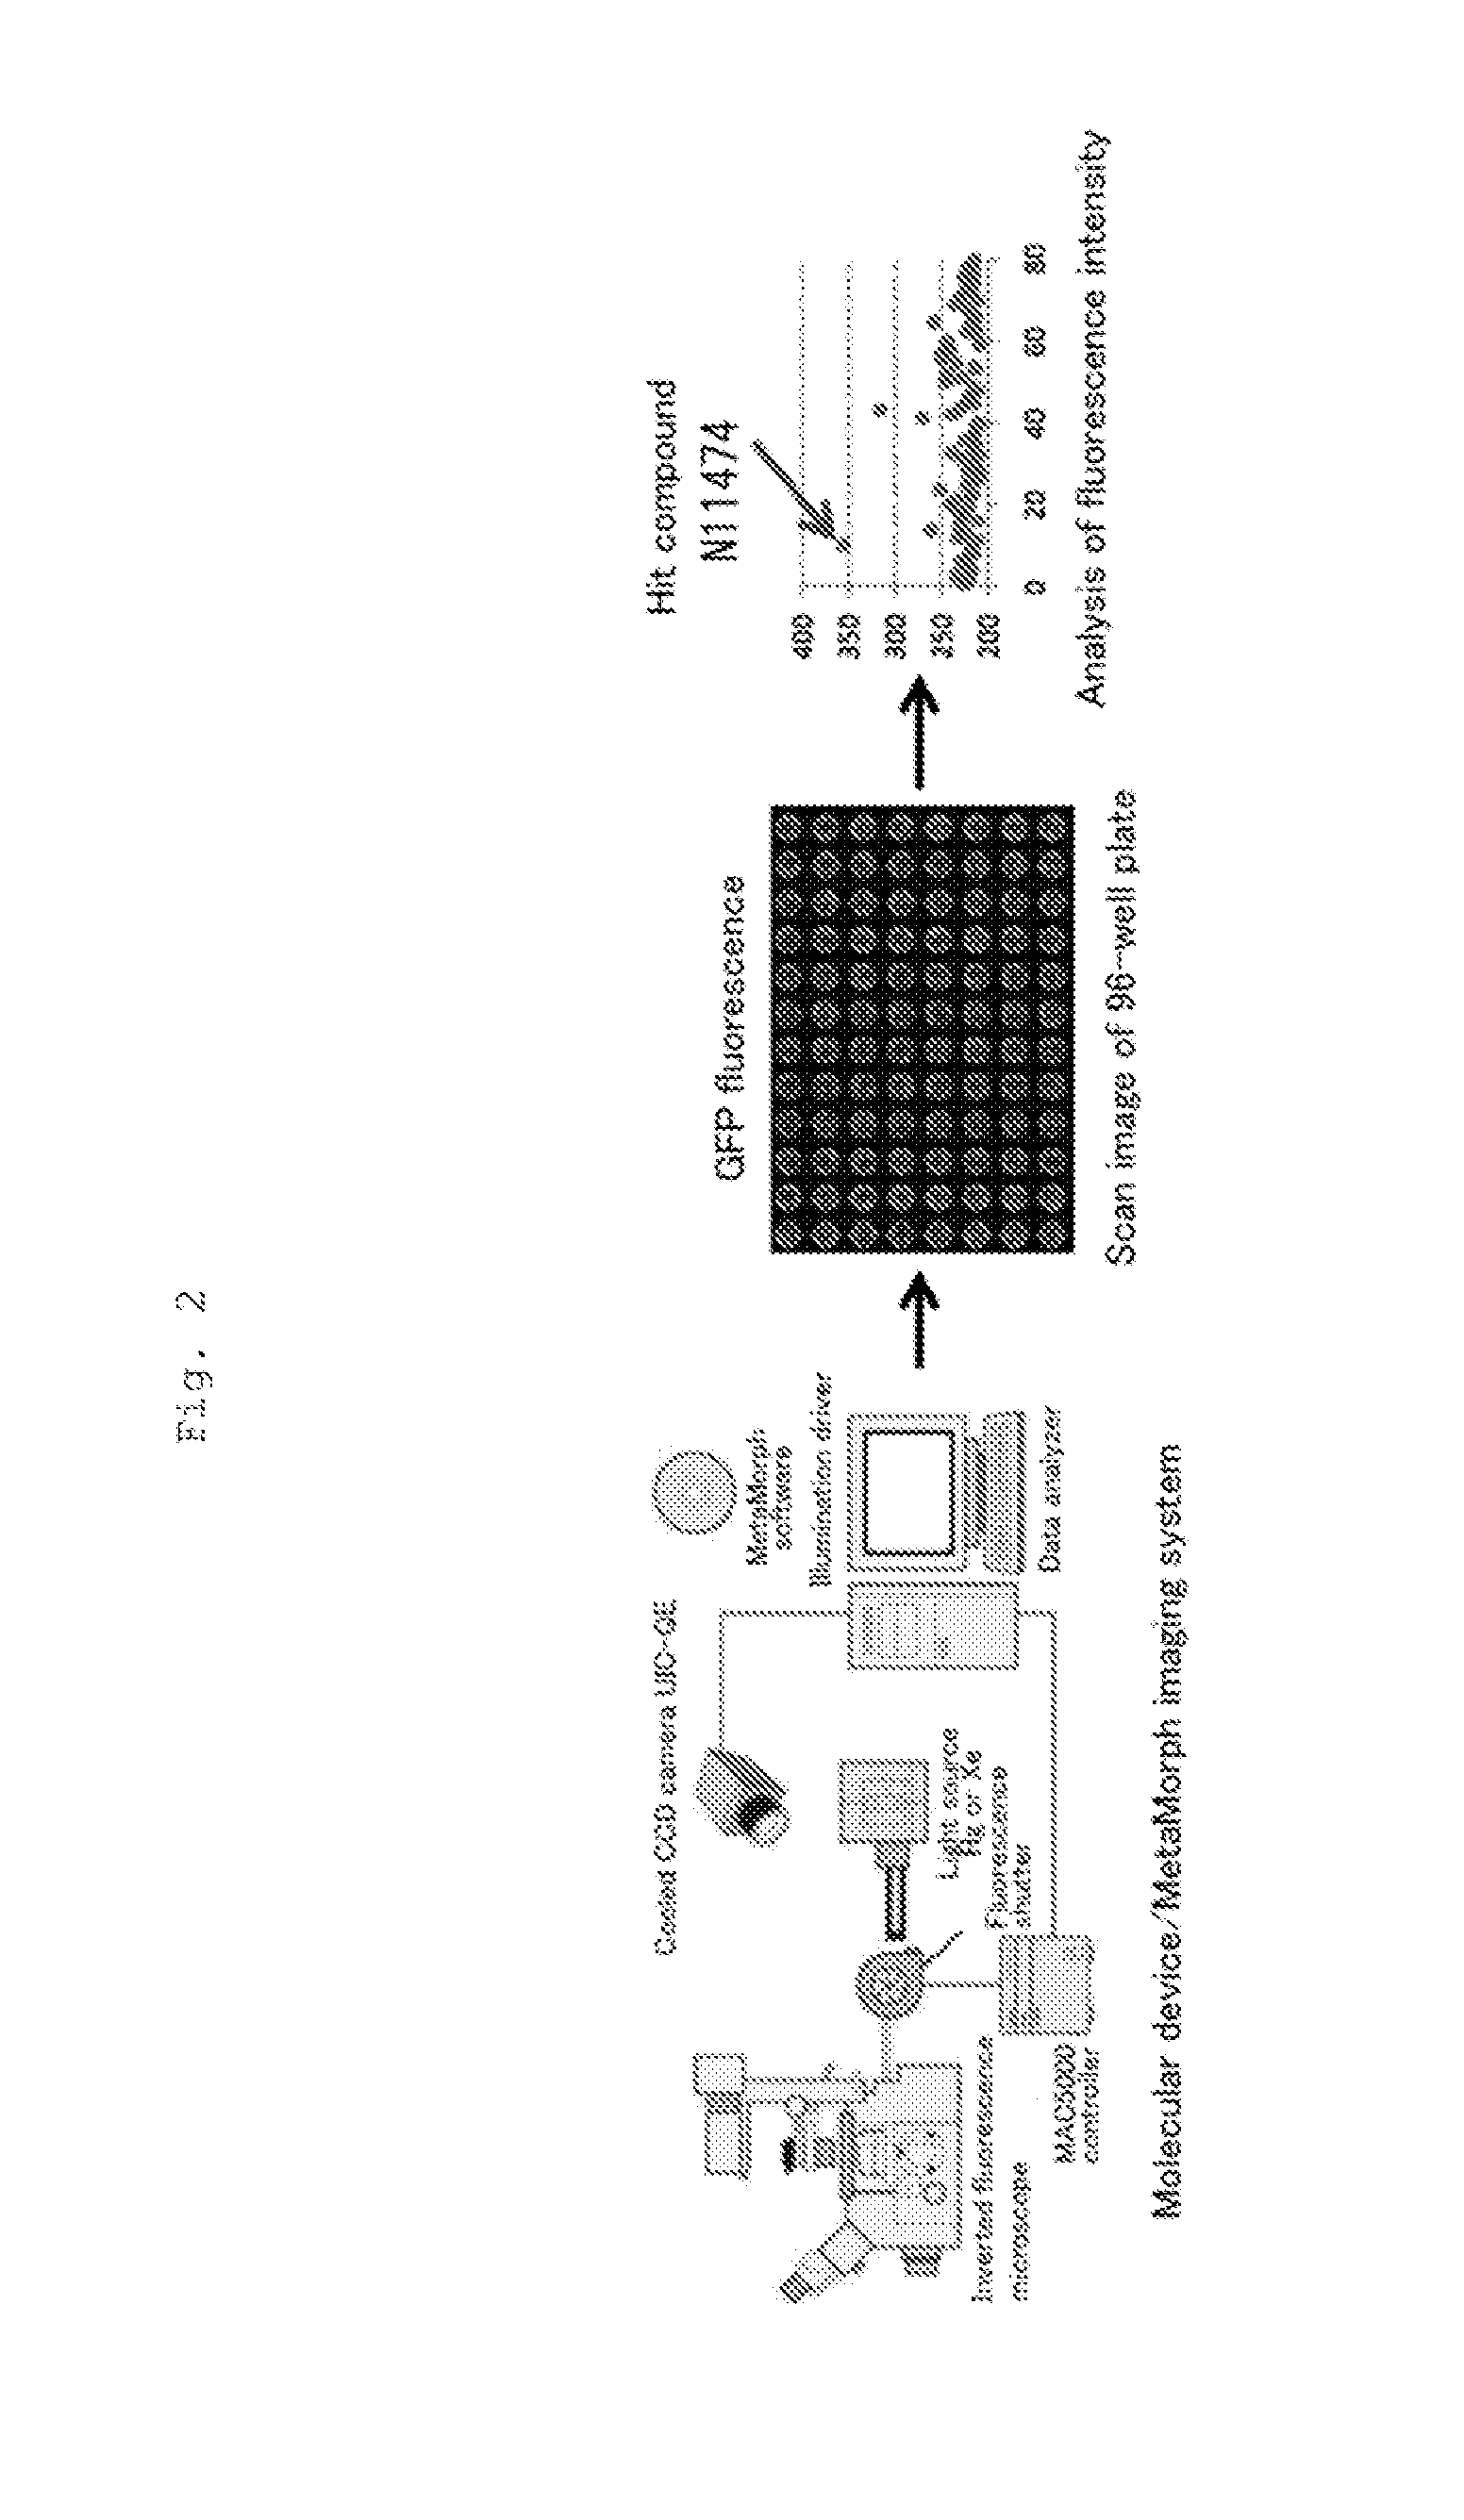 Method for Promoting Differentiation of Pluripotent Stem Cells into Cardiac Muscle Cells